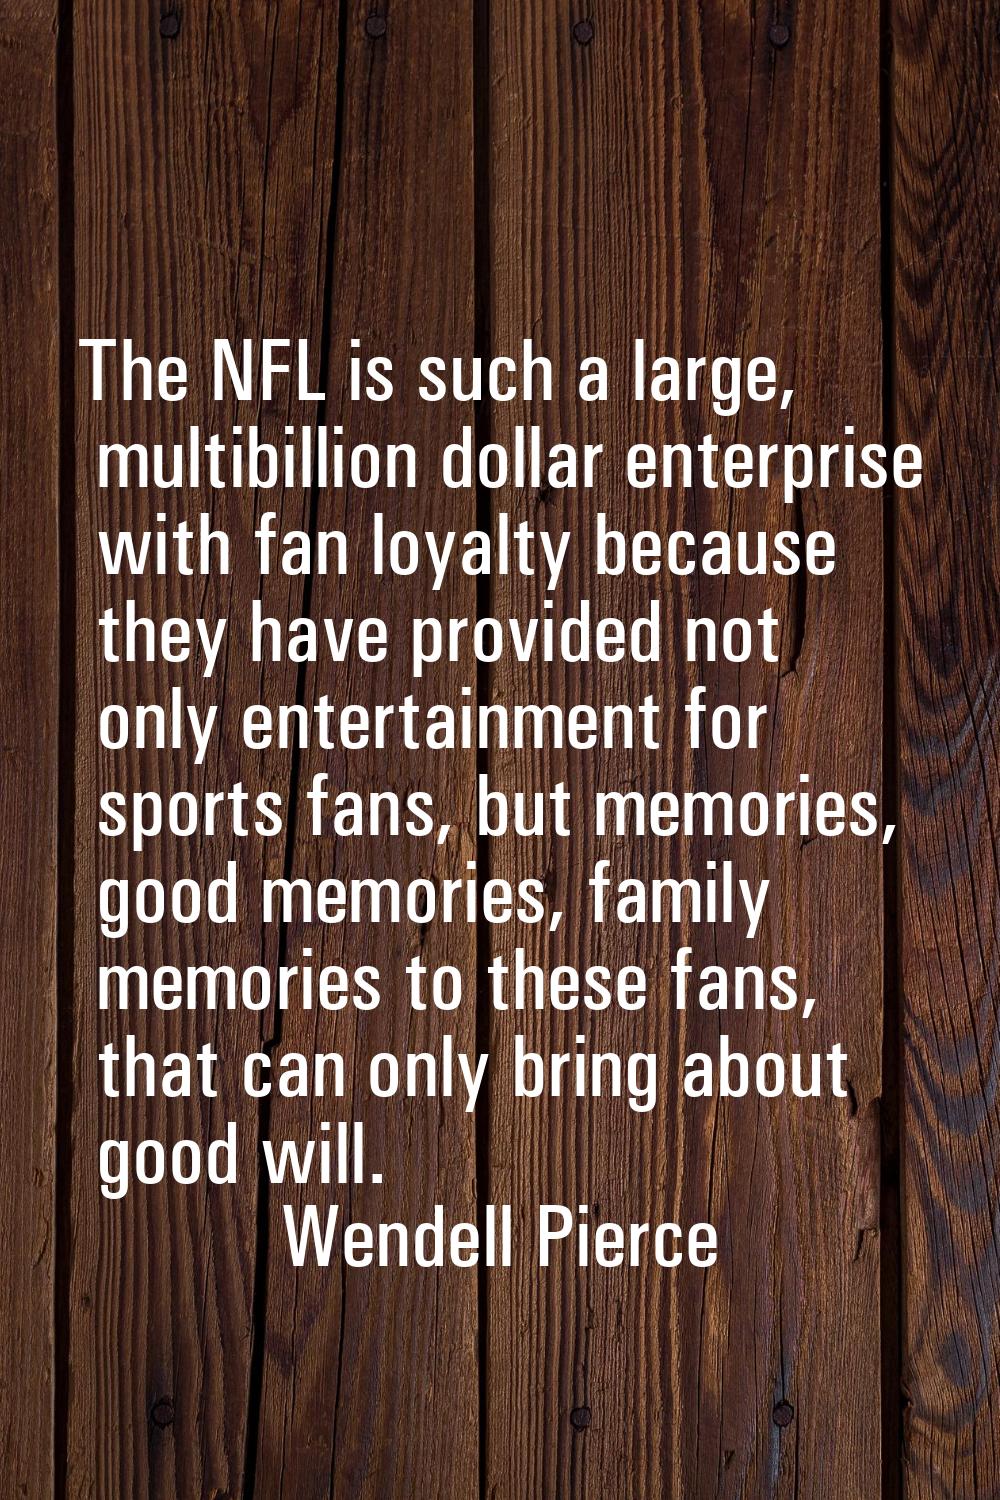 The NFL is such a large, multibillion dollar enterprise with fan loyalty because they have provided